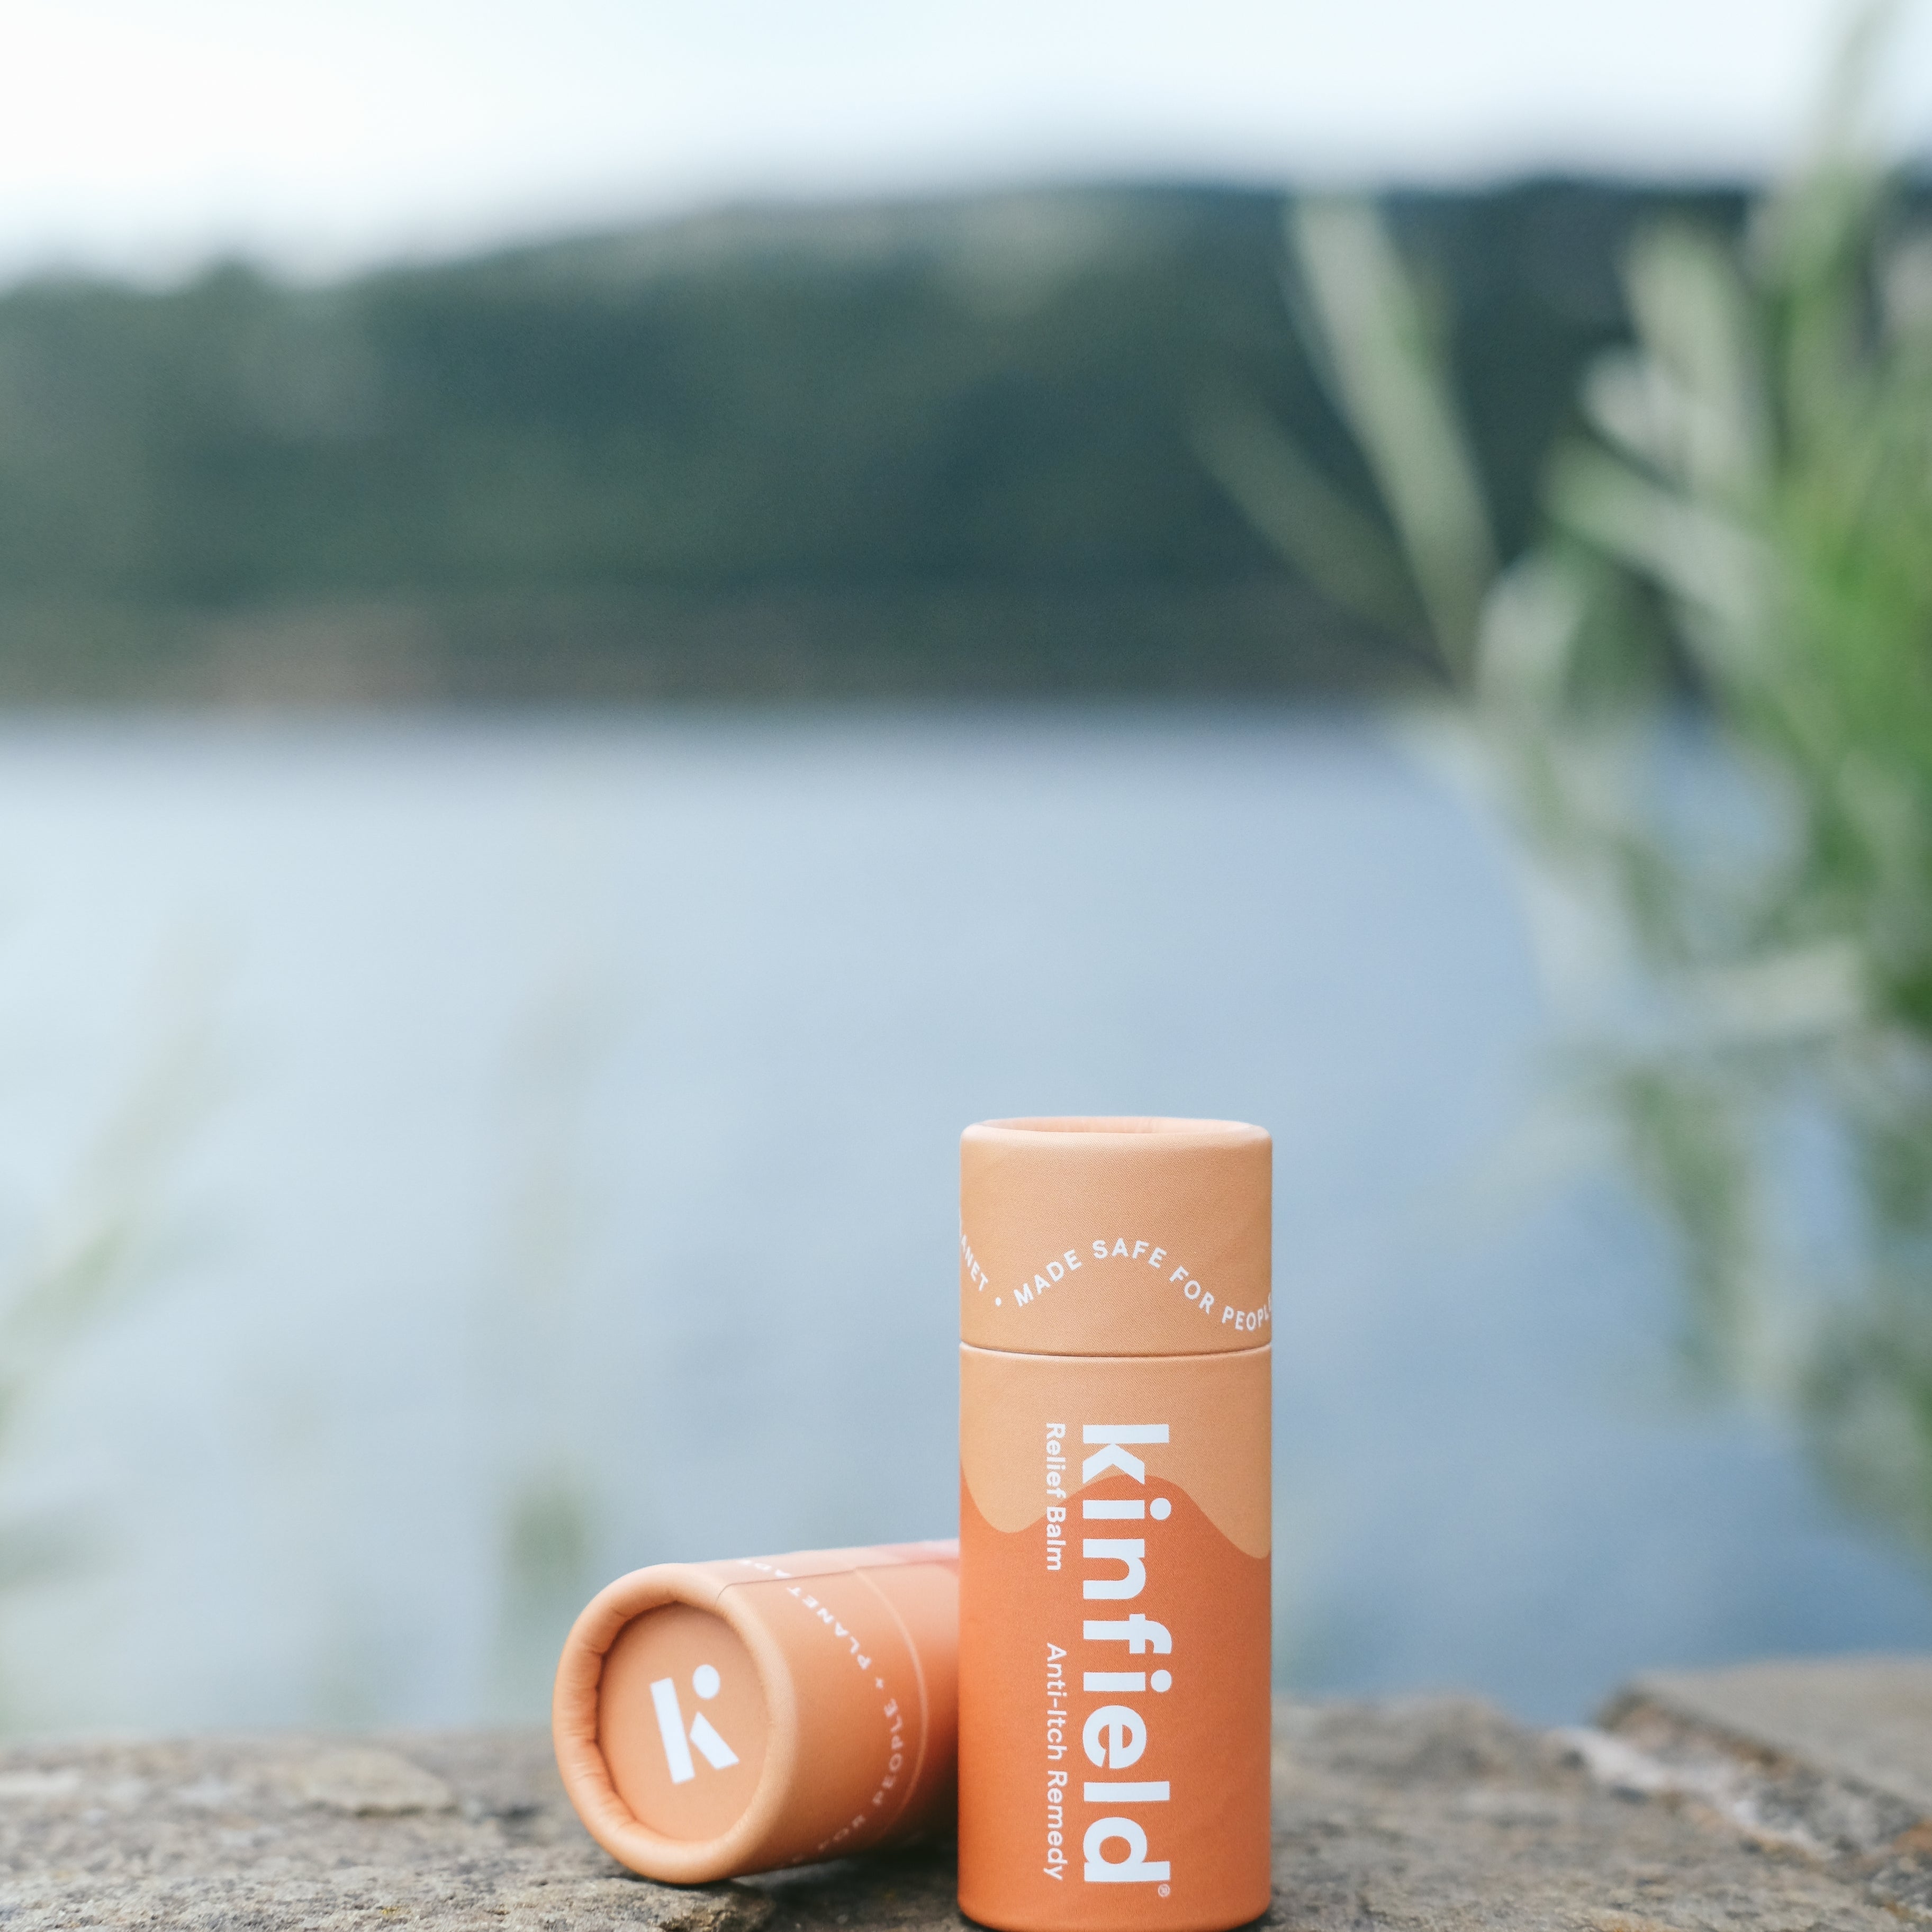 Kinfield | Relief Balm, Personal Care, Kinfield, Defiance Outdoor Gear Co.